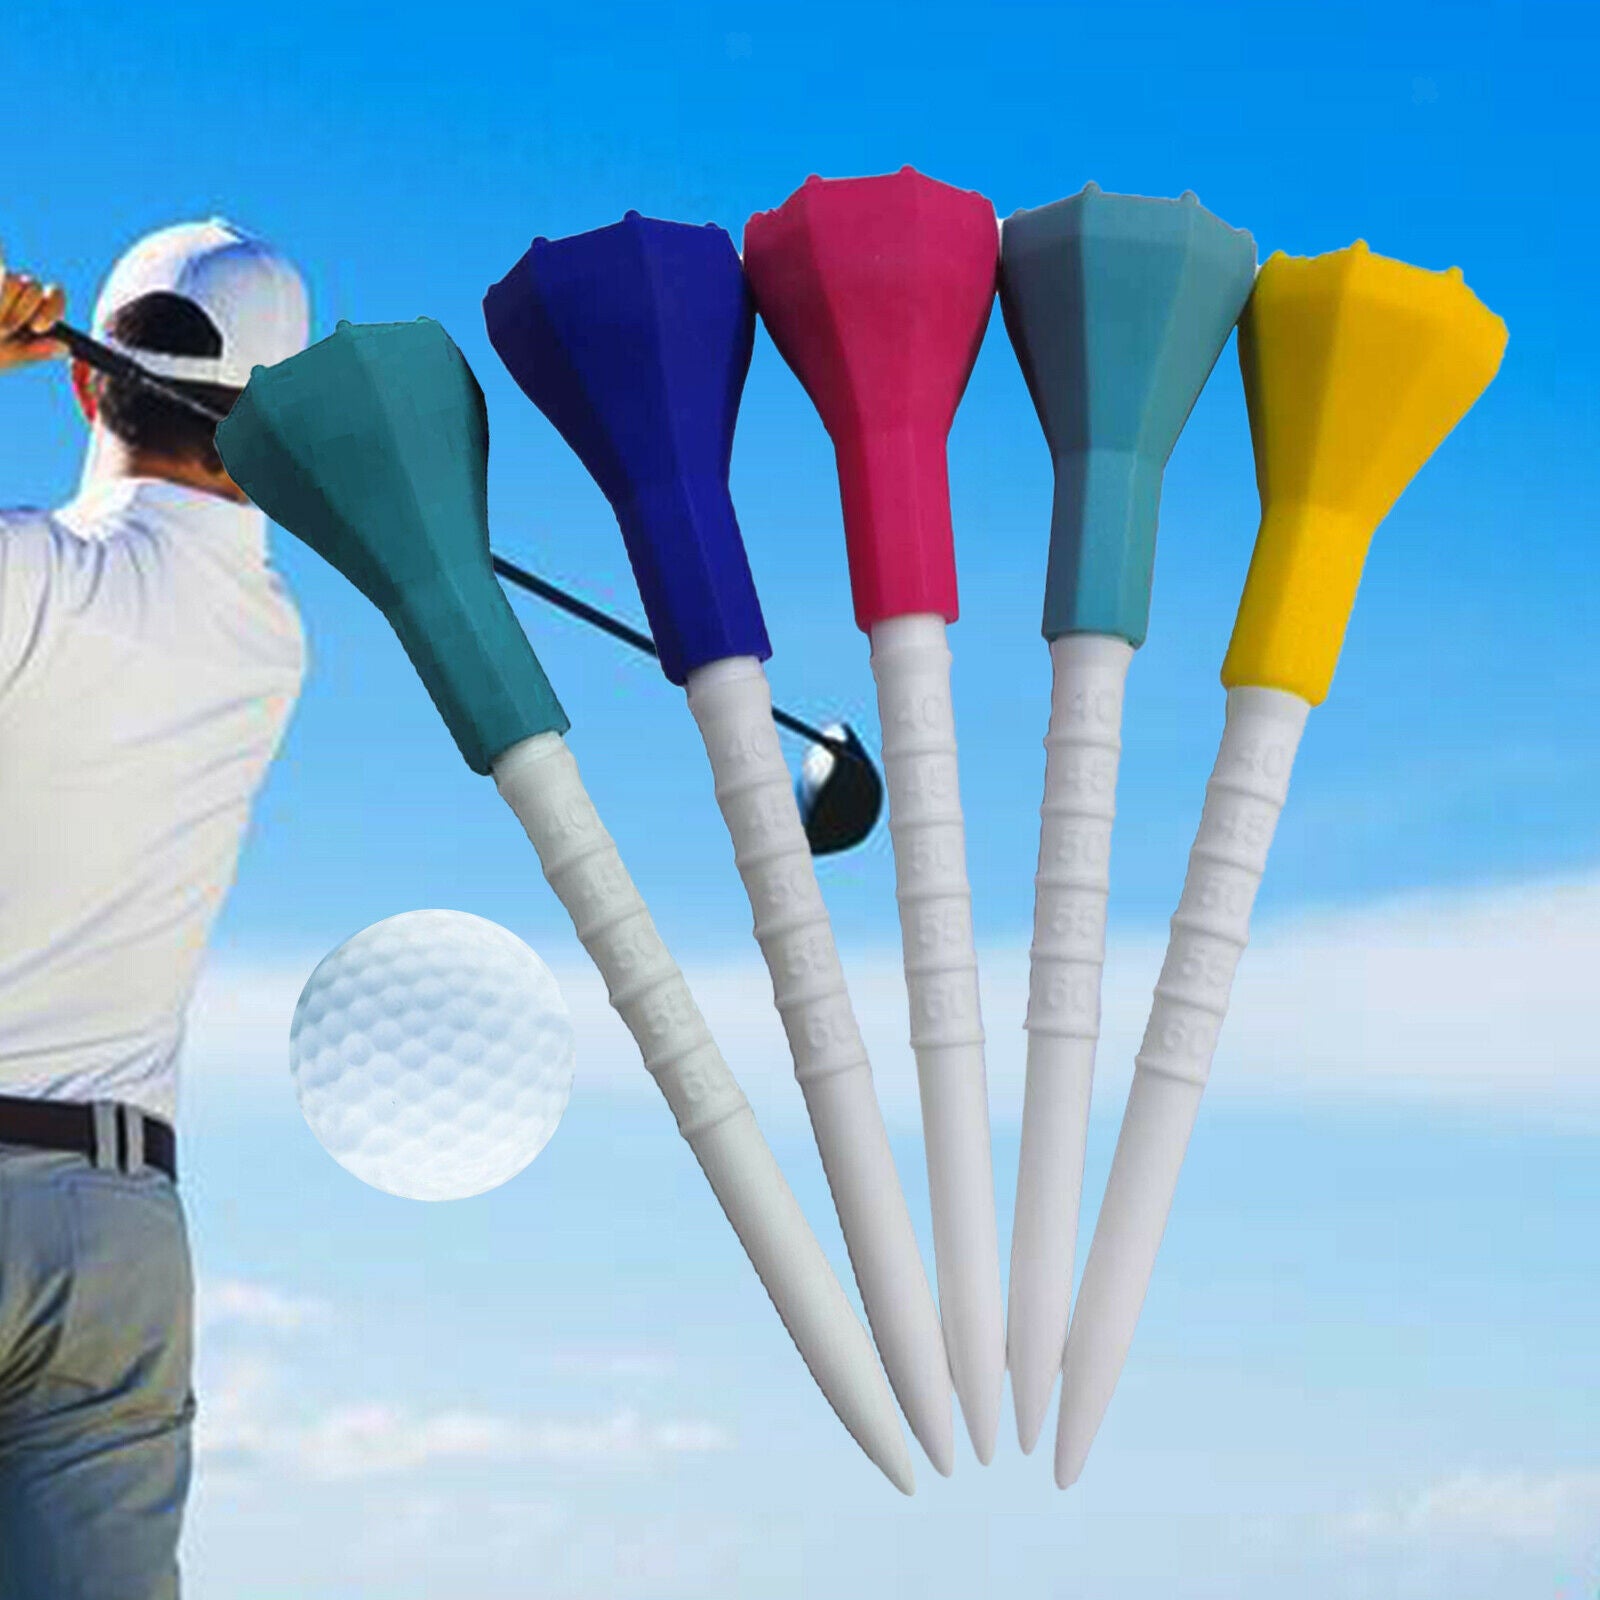 5x Plastic Golf Tees 87mm Big Cup Rubber Cover Top Golf Tee Ball Holder Tool